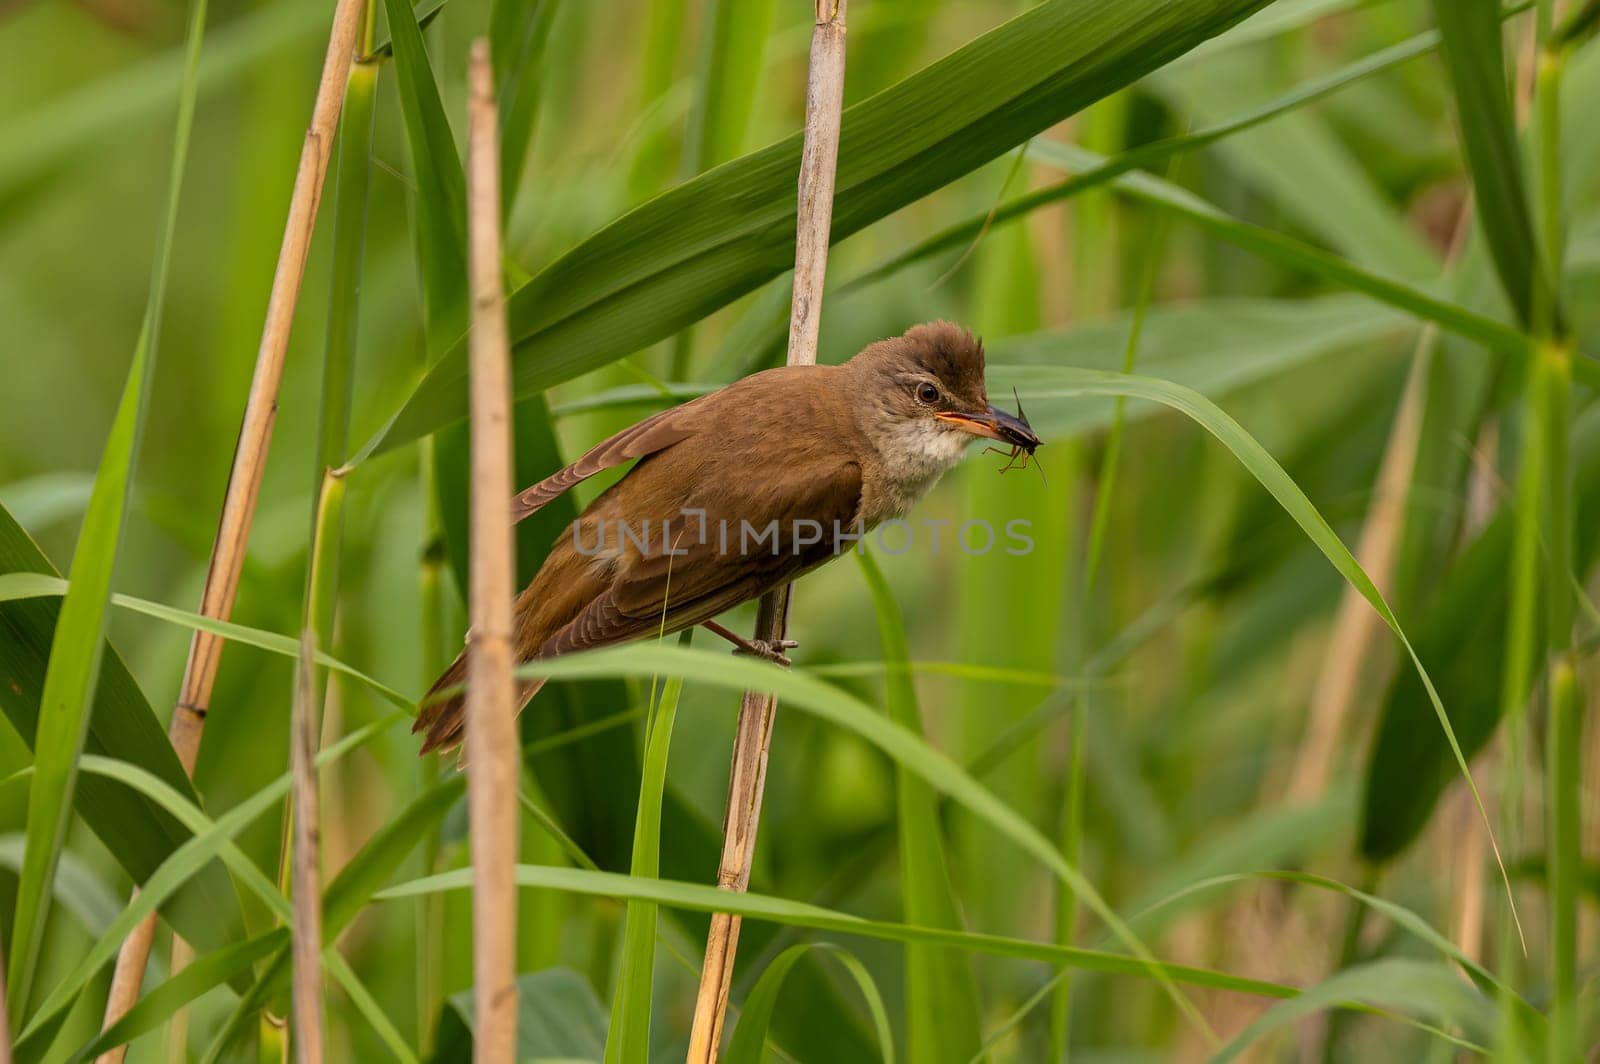 A skillful Great Reed Warbler perched on a reed stem, proudly holding a tasty worm in its beak. A testament to its hunting prowess.